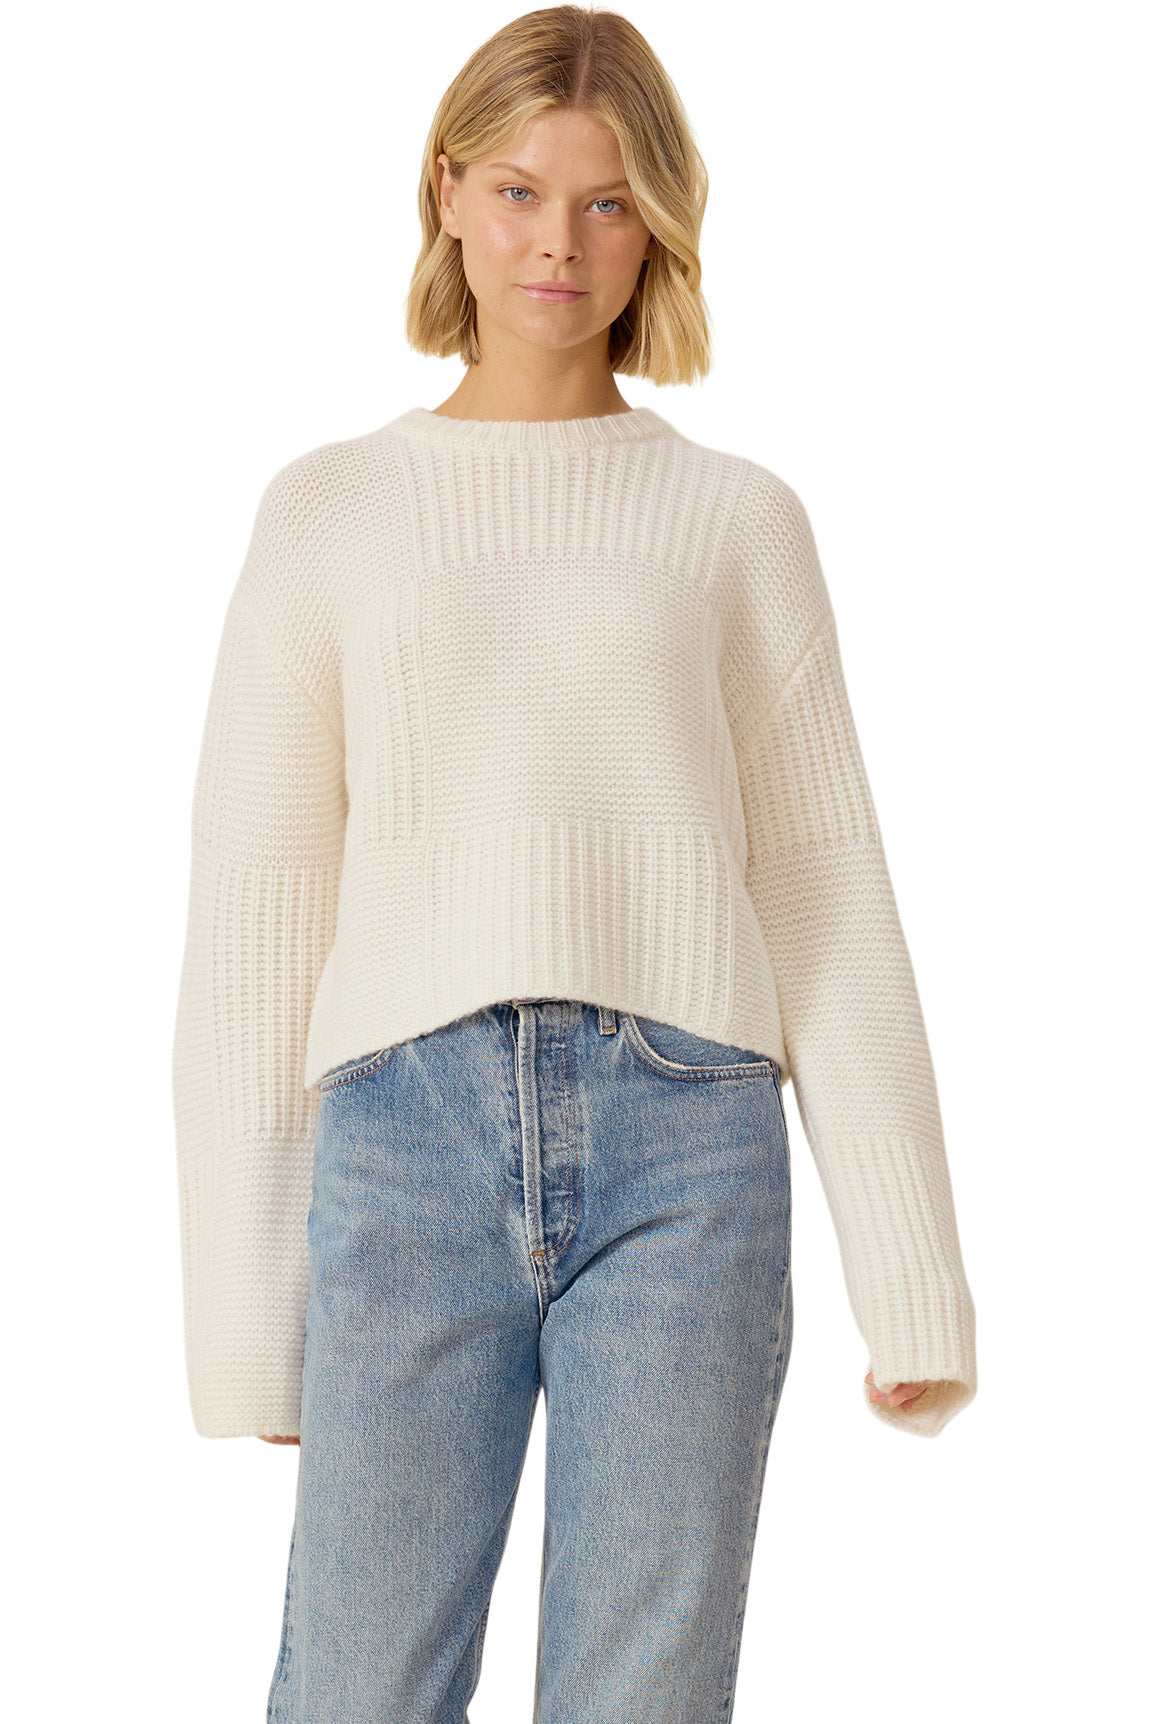 One Grey Day Georgia Cashmere Sweater in Ivory